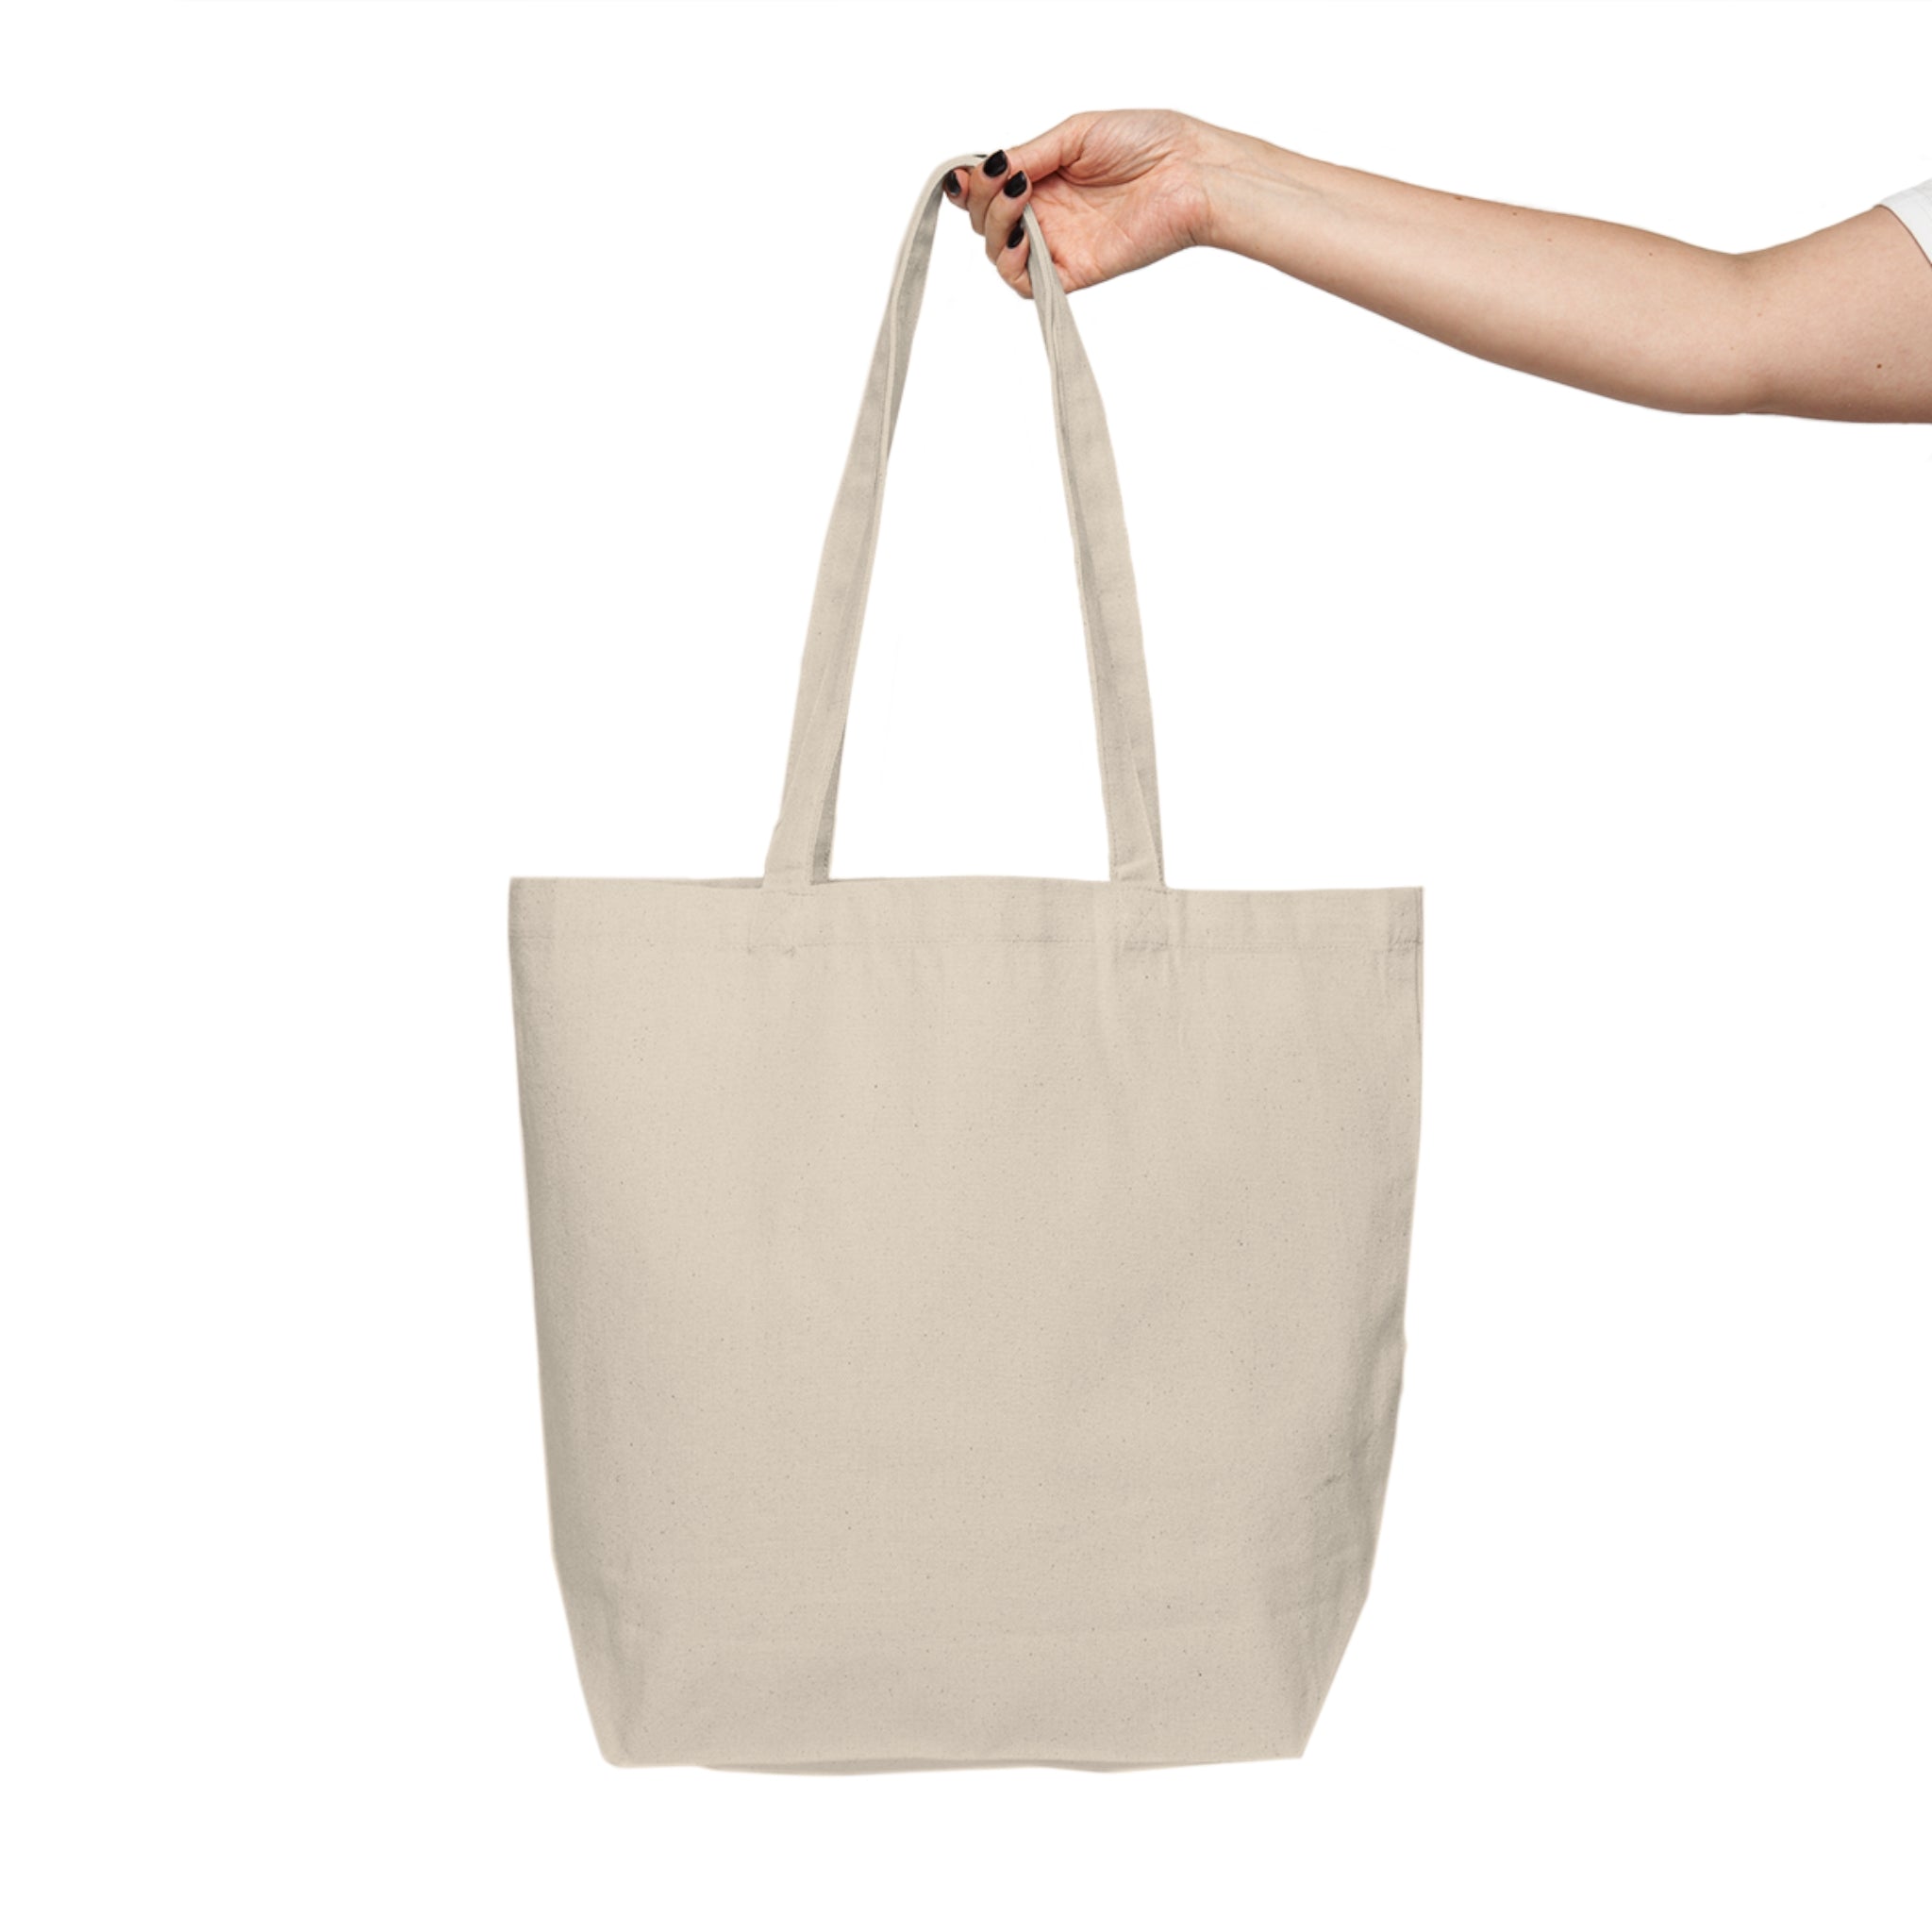 It's Sweater Weather - Canvas Shopping Tote - Spruced Roost